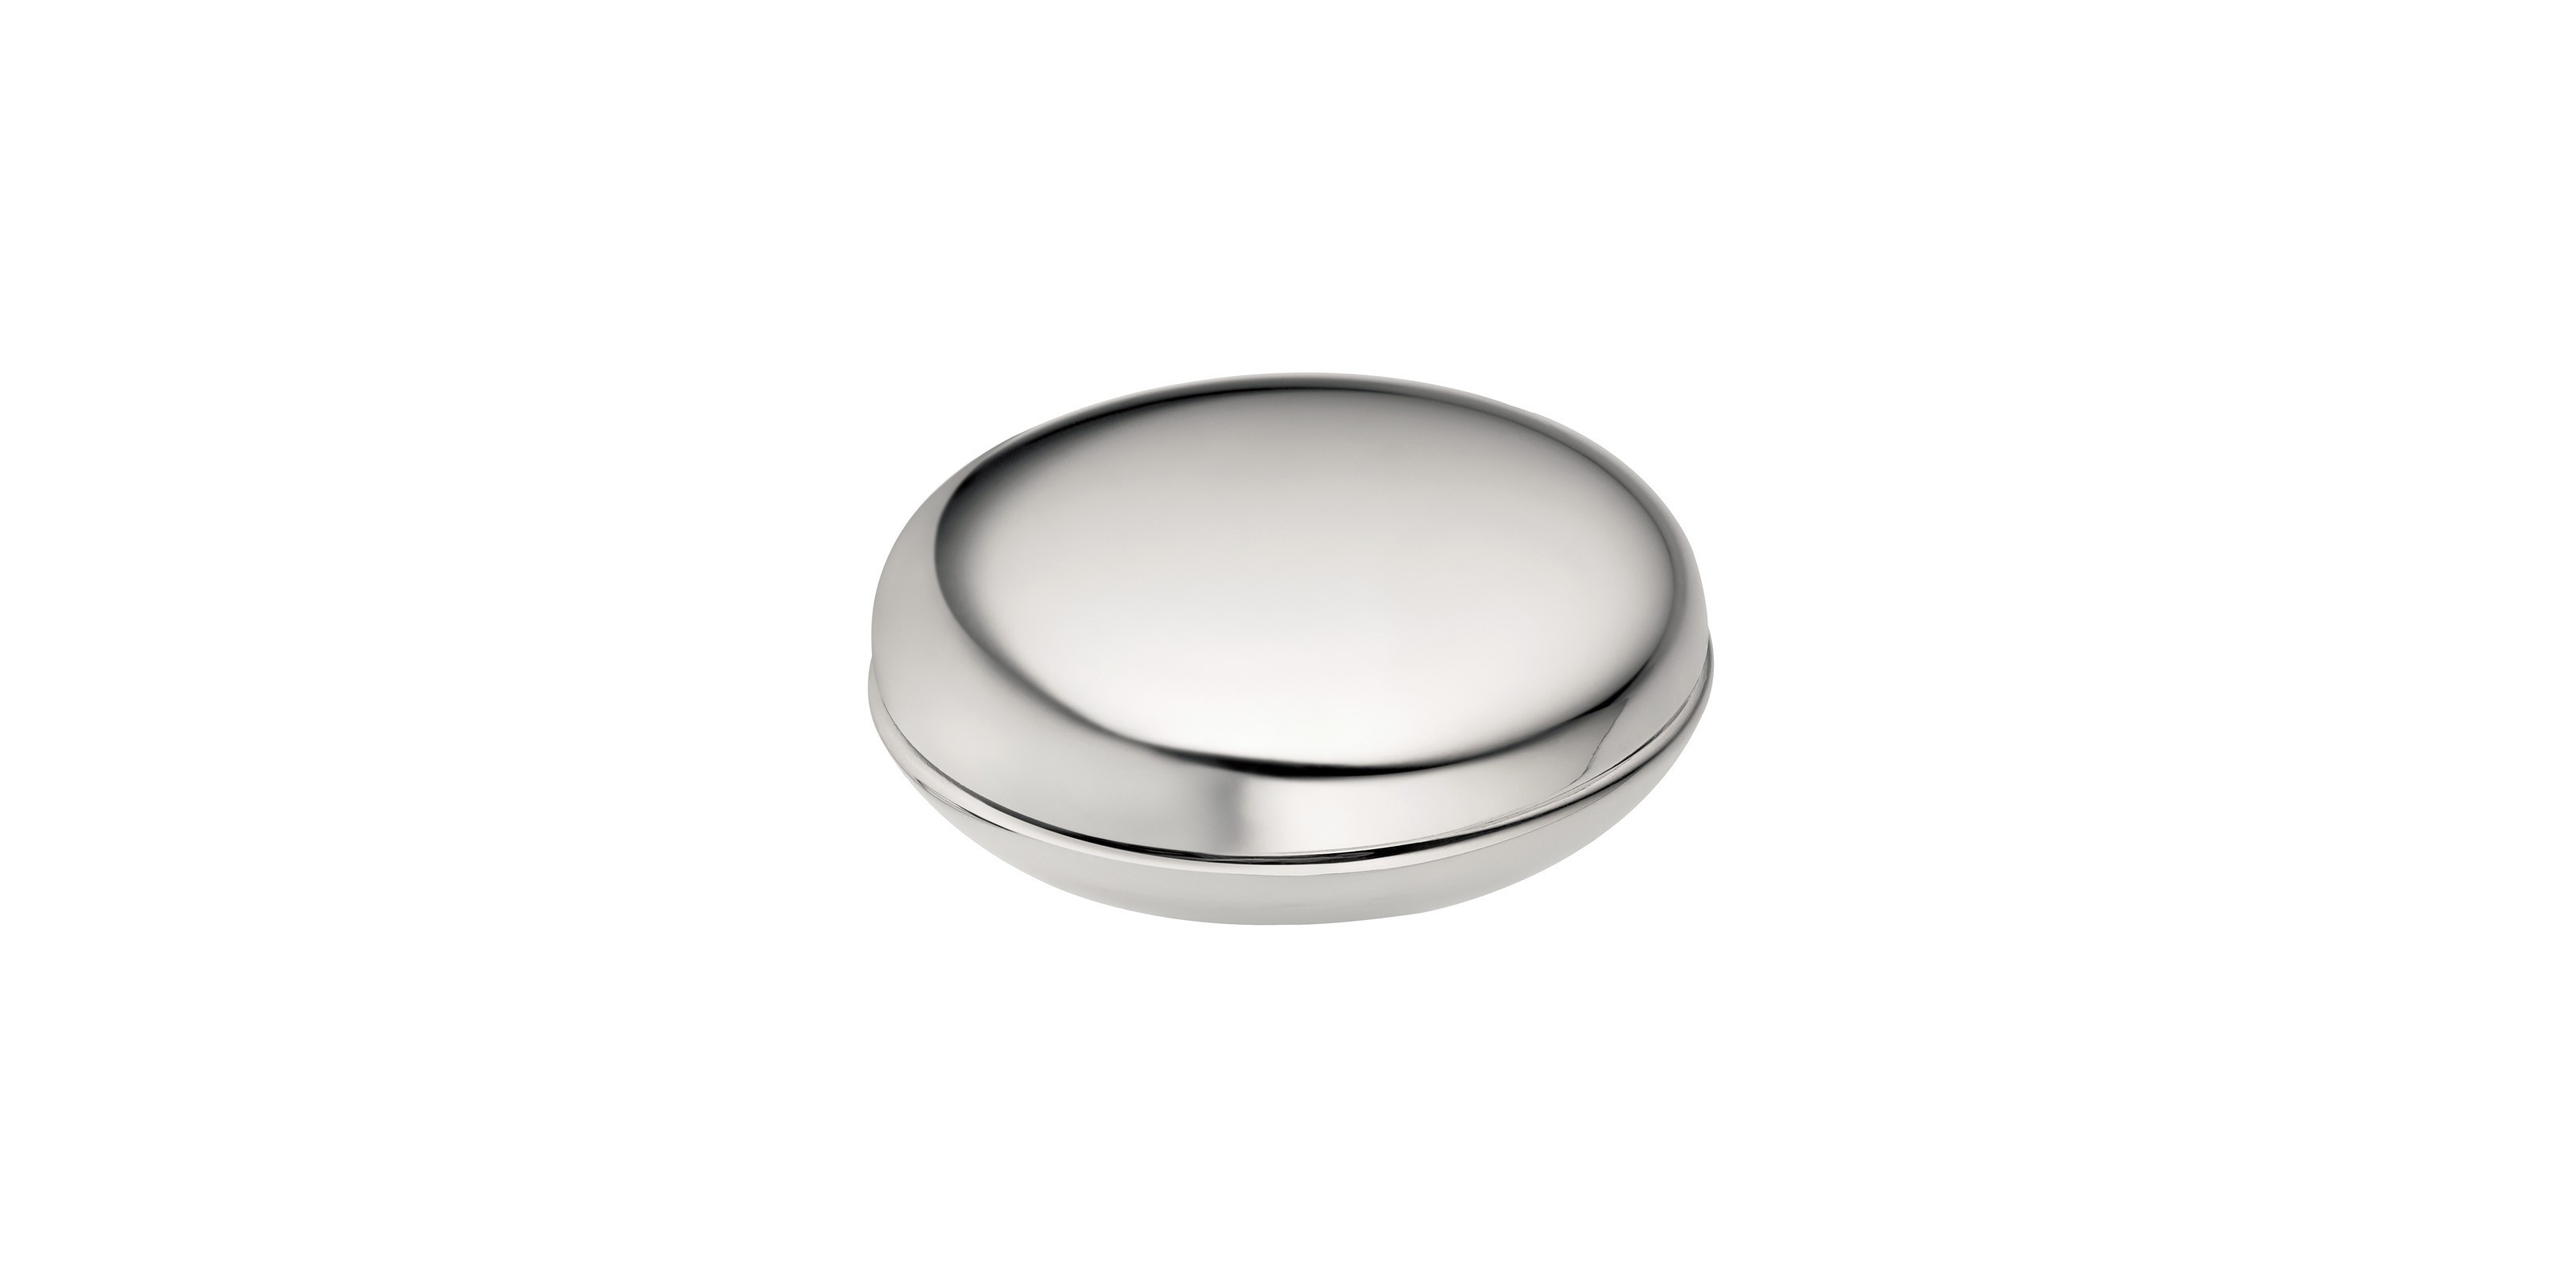 20 attractive Christofle Uni Vase 2024 free download christofle uni vase of silver plated pill box small round container uni christofle with diminuer le zoom